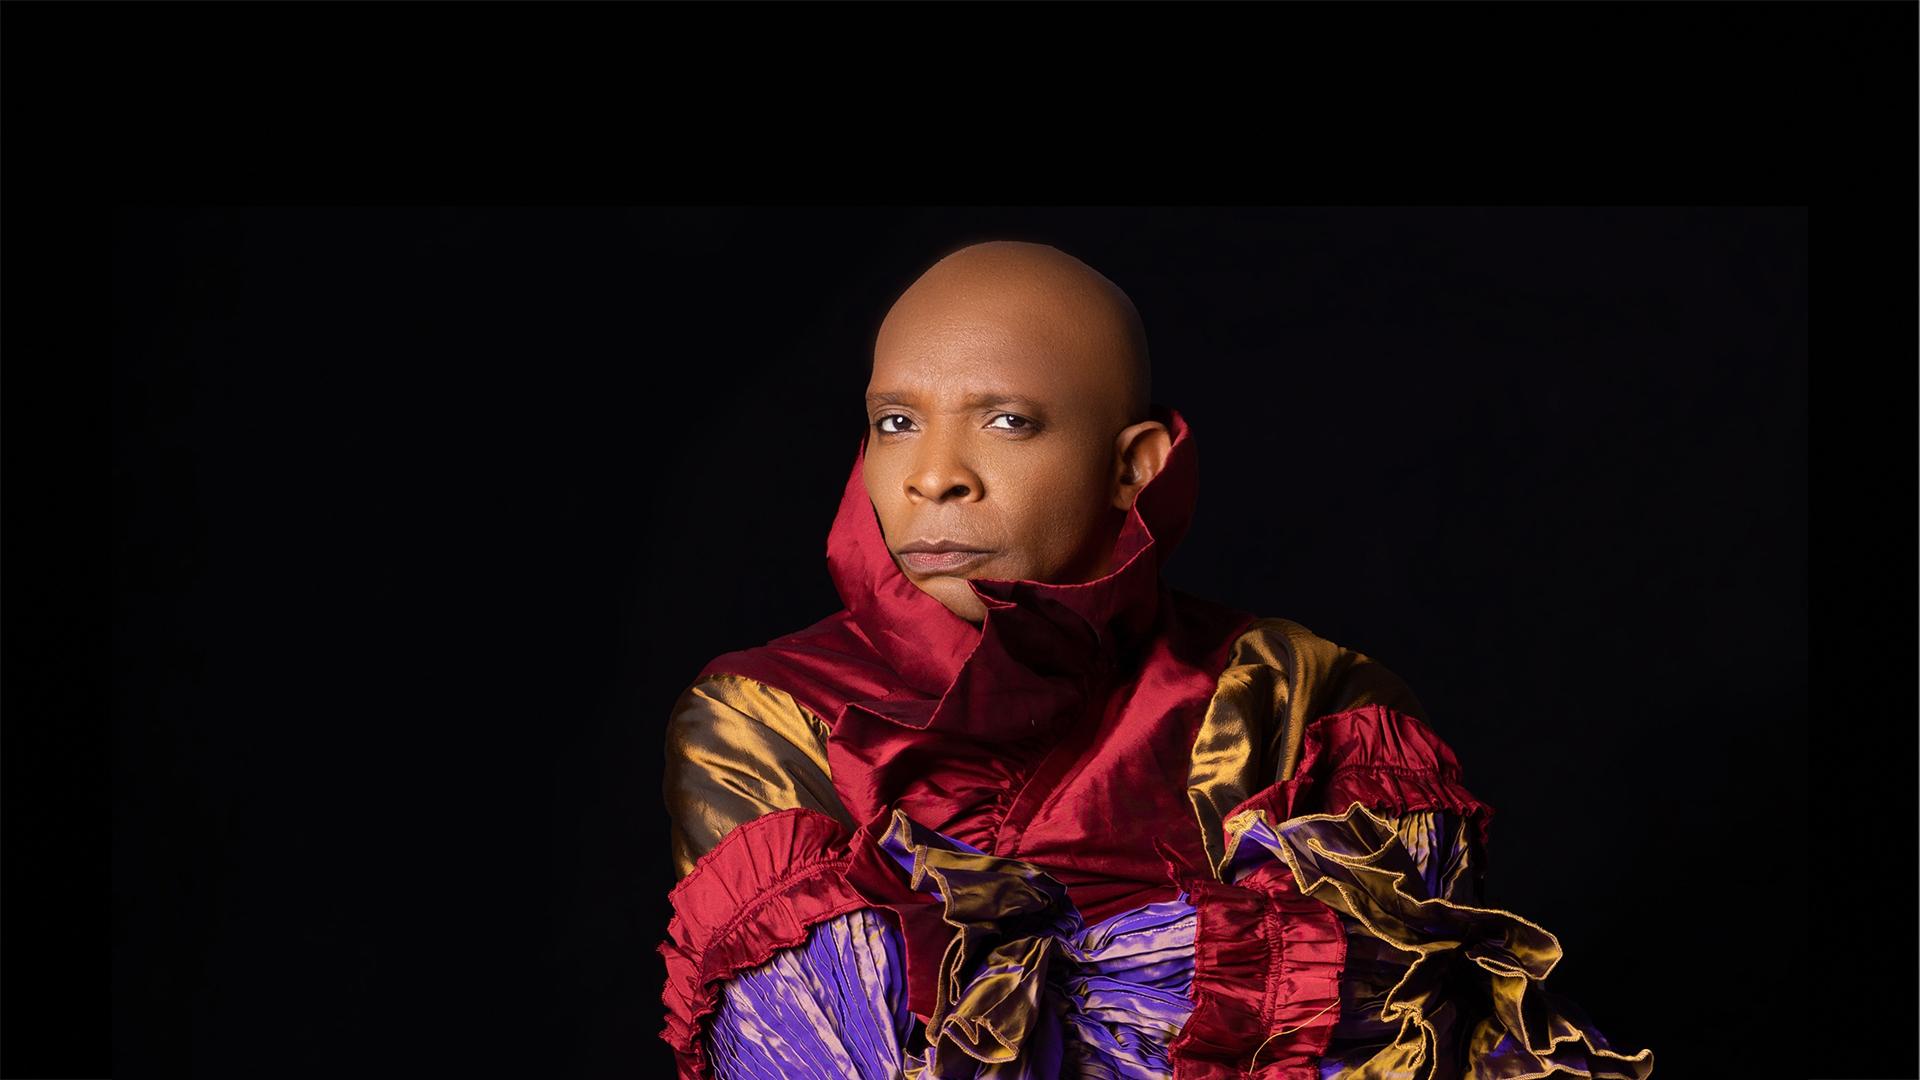 Haitian Musician and Voudo priest Erol Josué has a new album titled Pèlerinaj, which includes songs like “Rén Sobo,” “Ati Sole” and “Palave Maria" that invoke Voudo goddesses and saints.